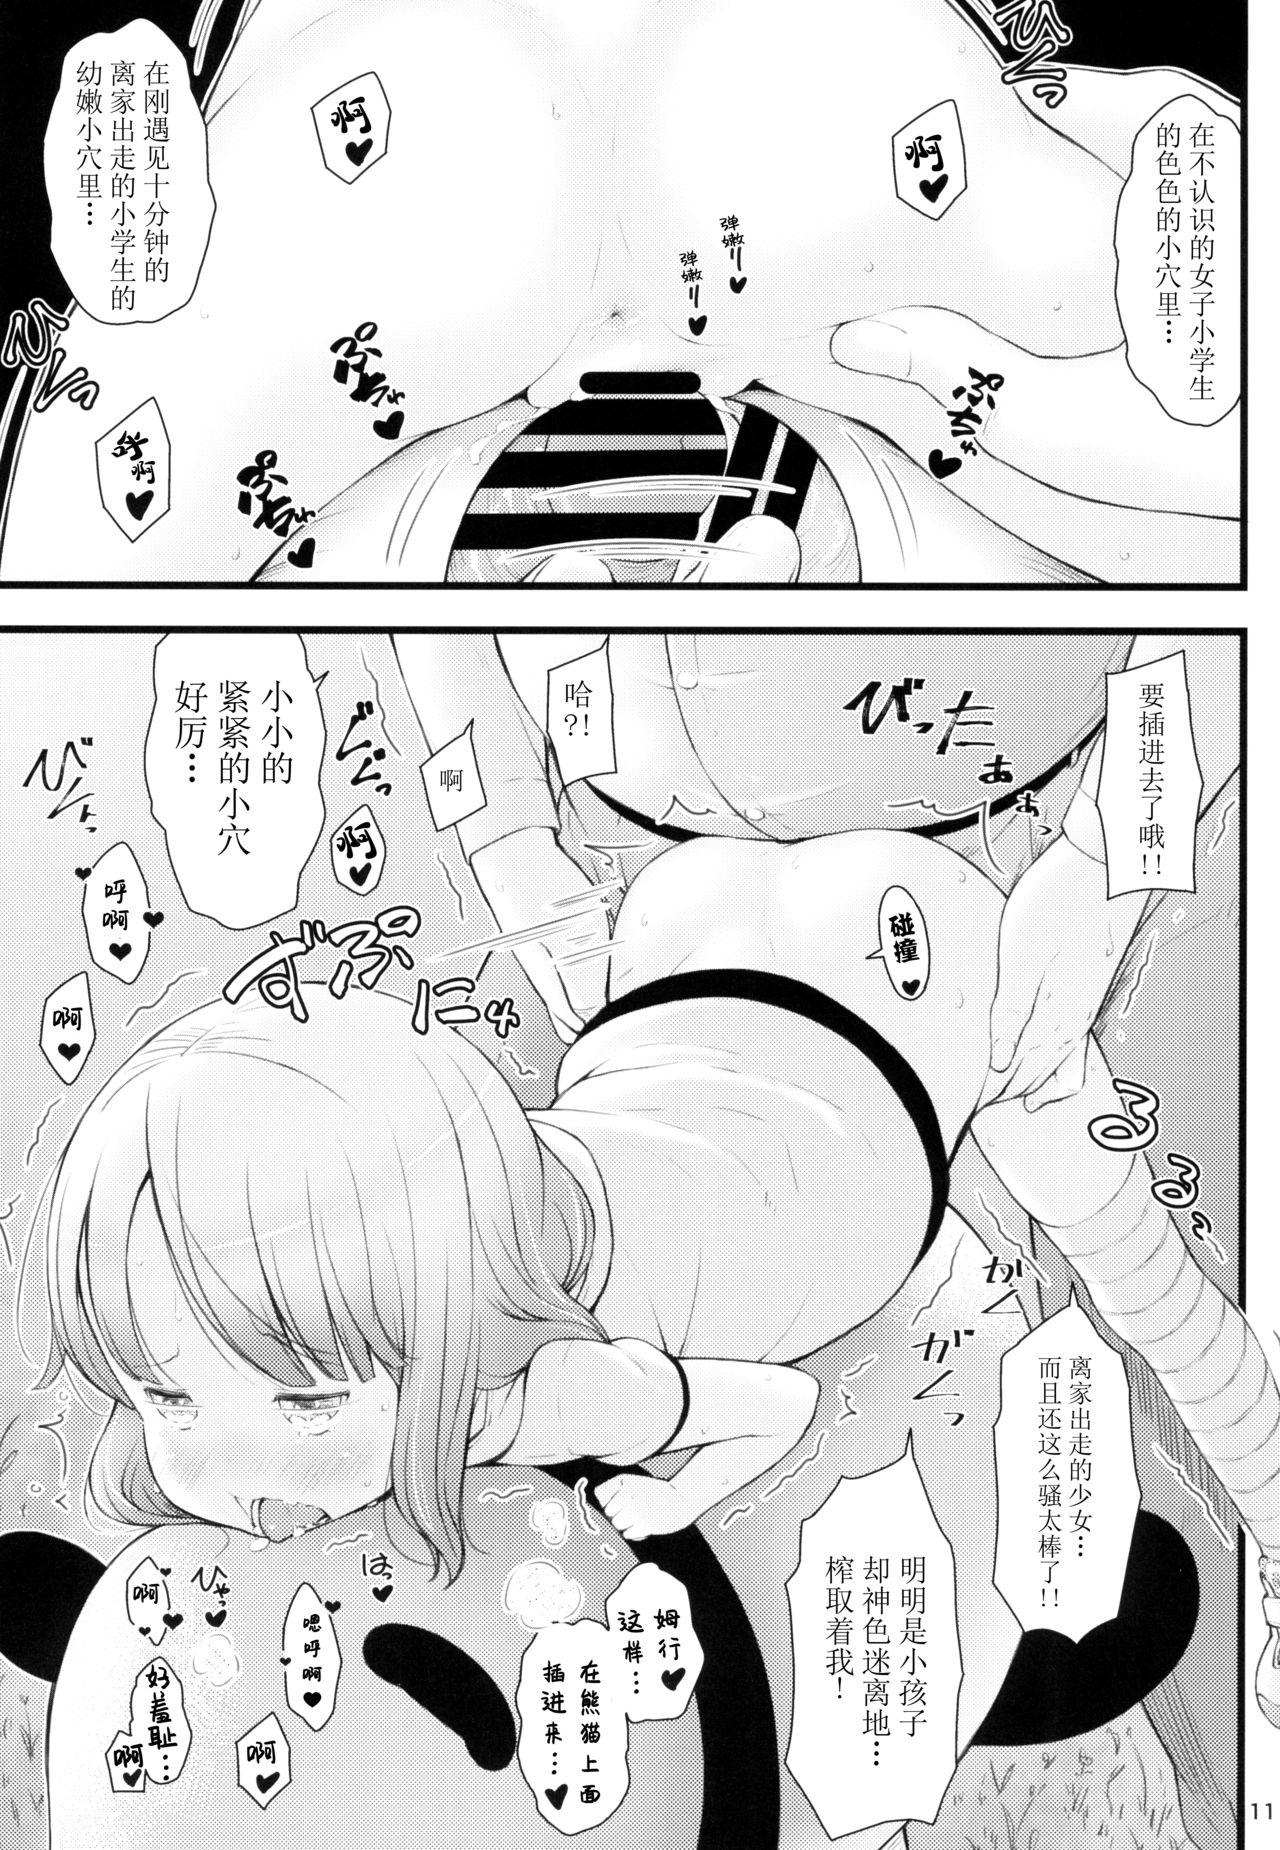 Passionate Stray cat - Original Best Blowjobs - Page 11